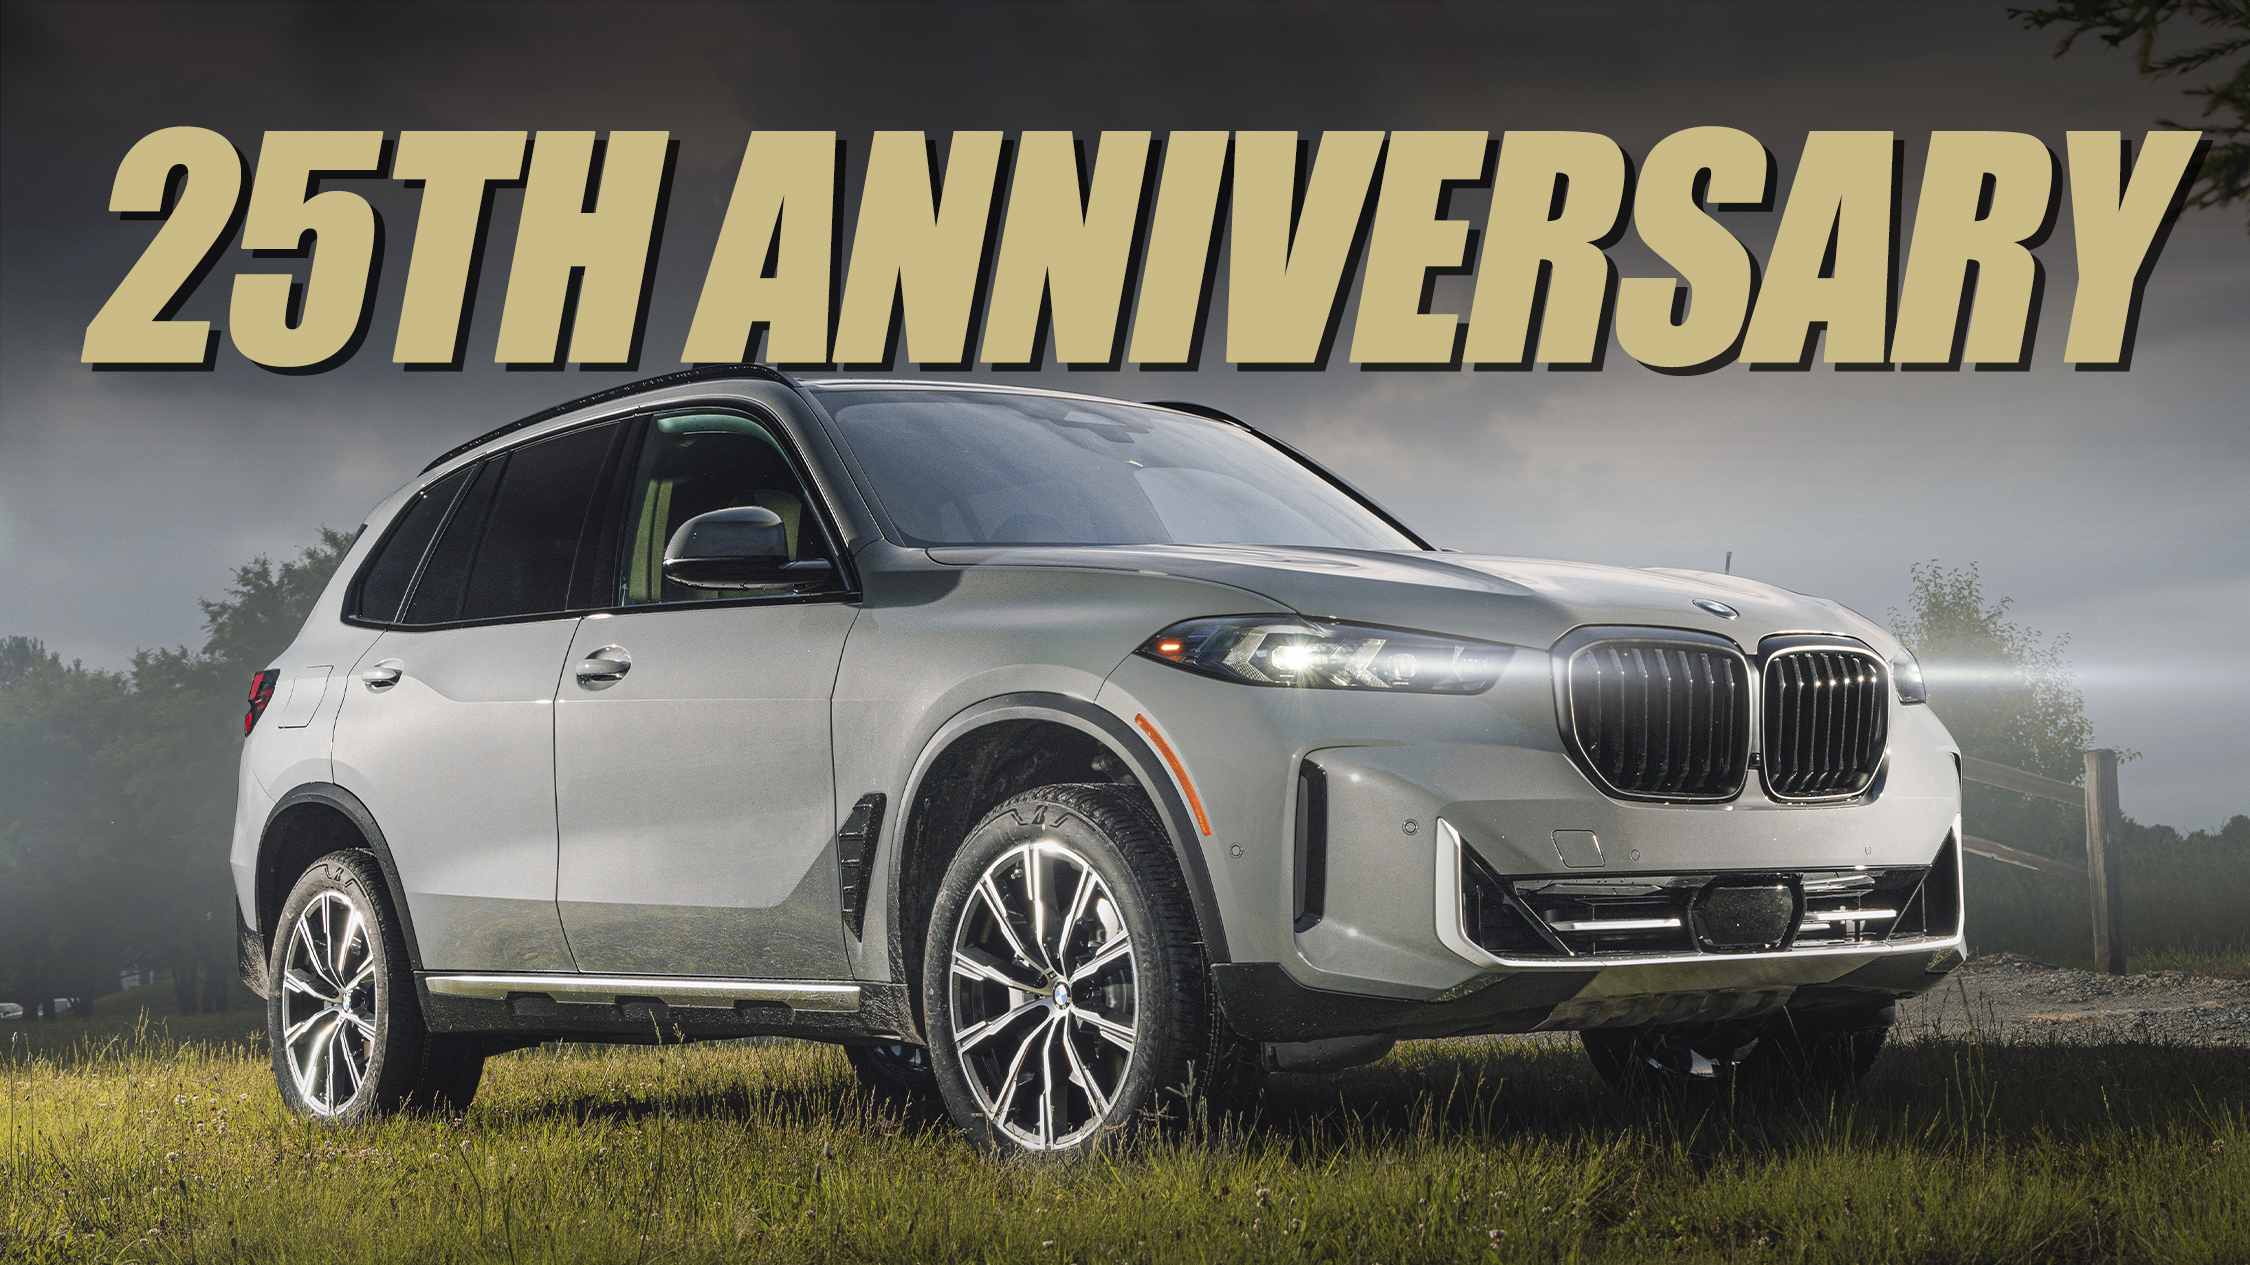 BMW X5 Turns 25: Birthday Edition Gets Dirty With Off-Road Upgrades